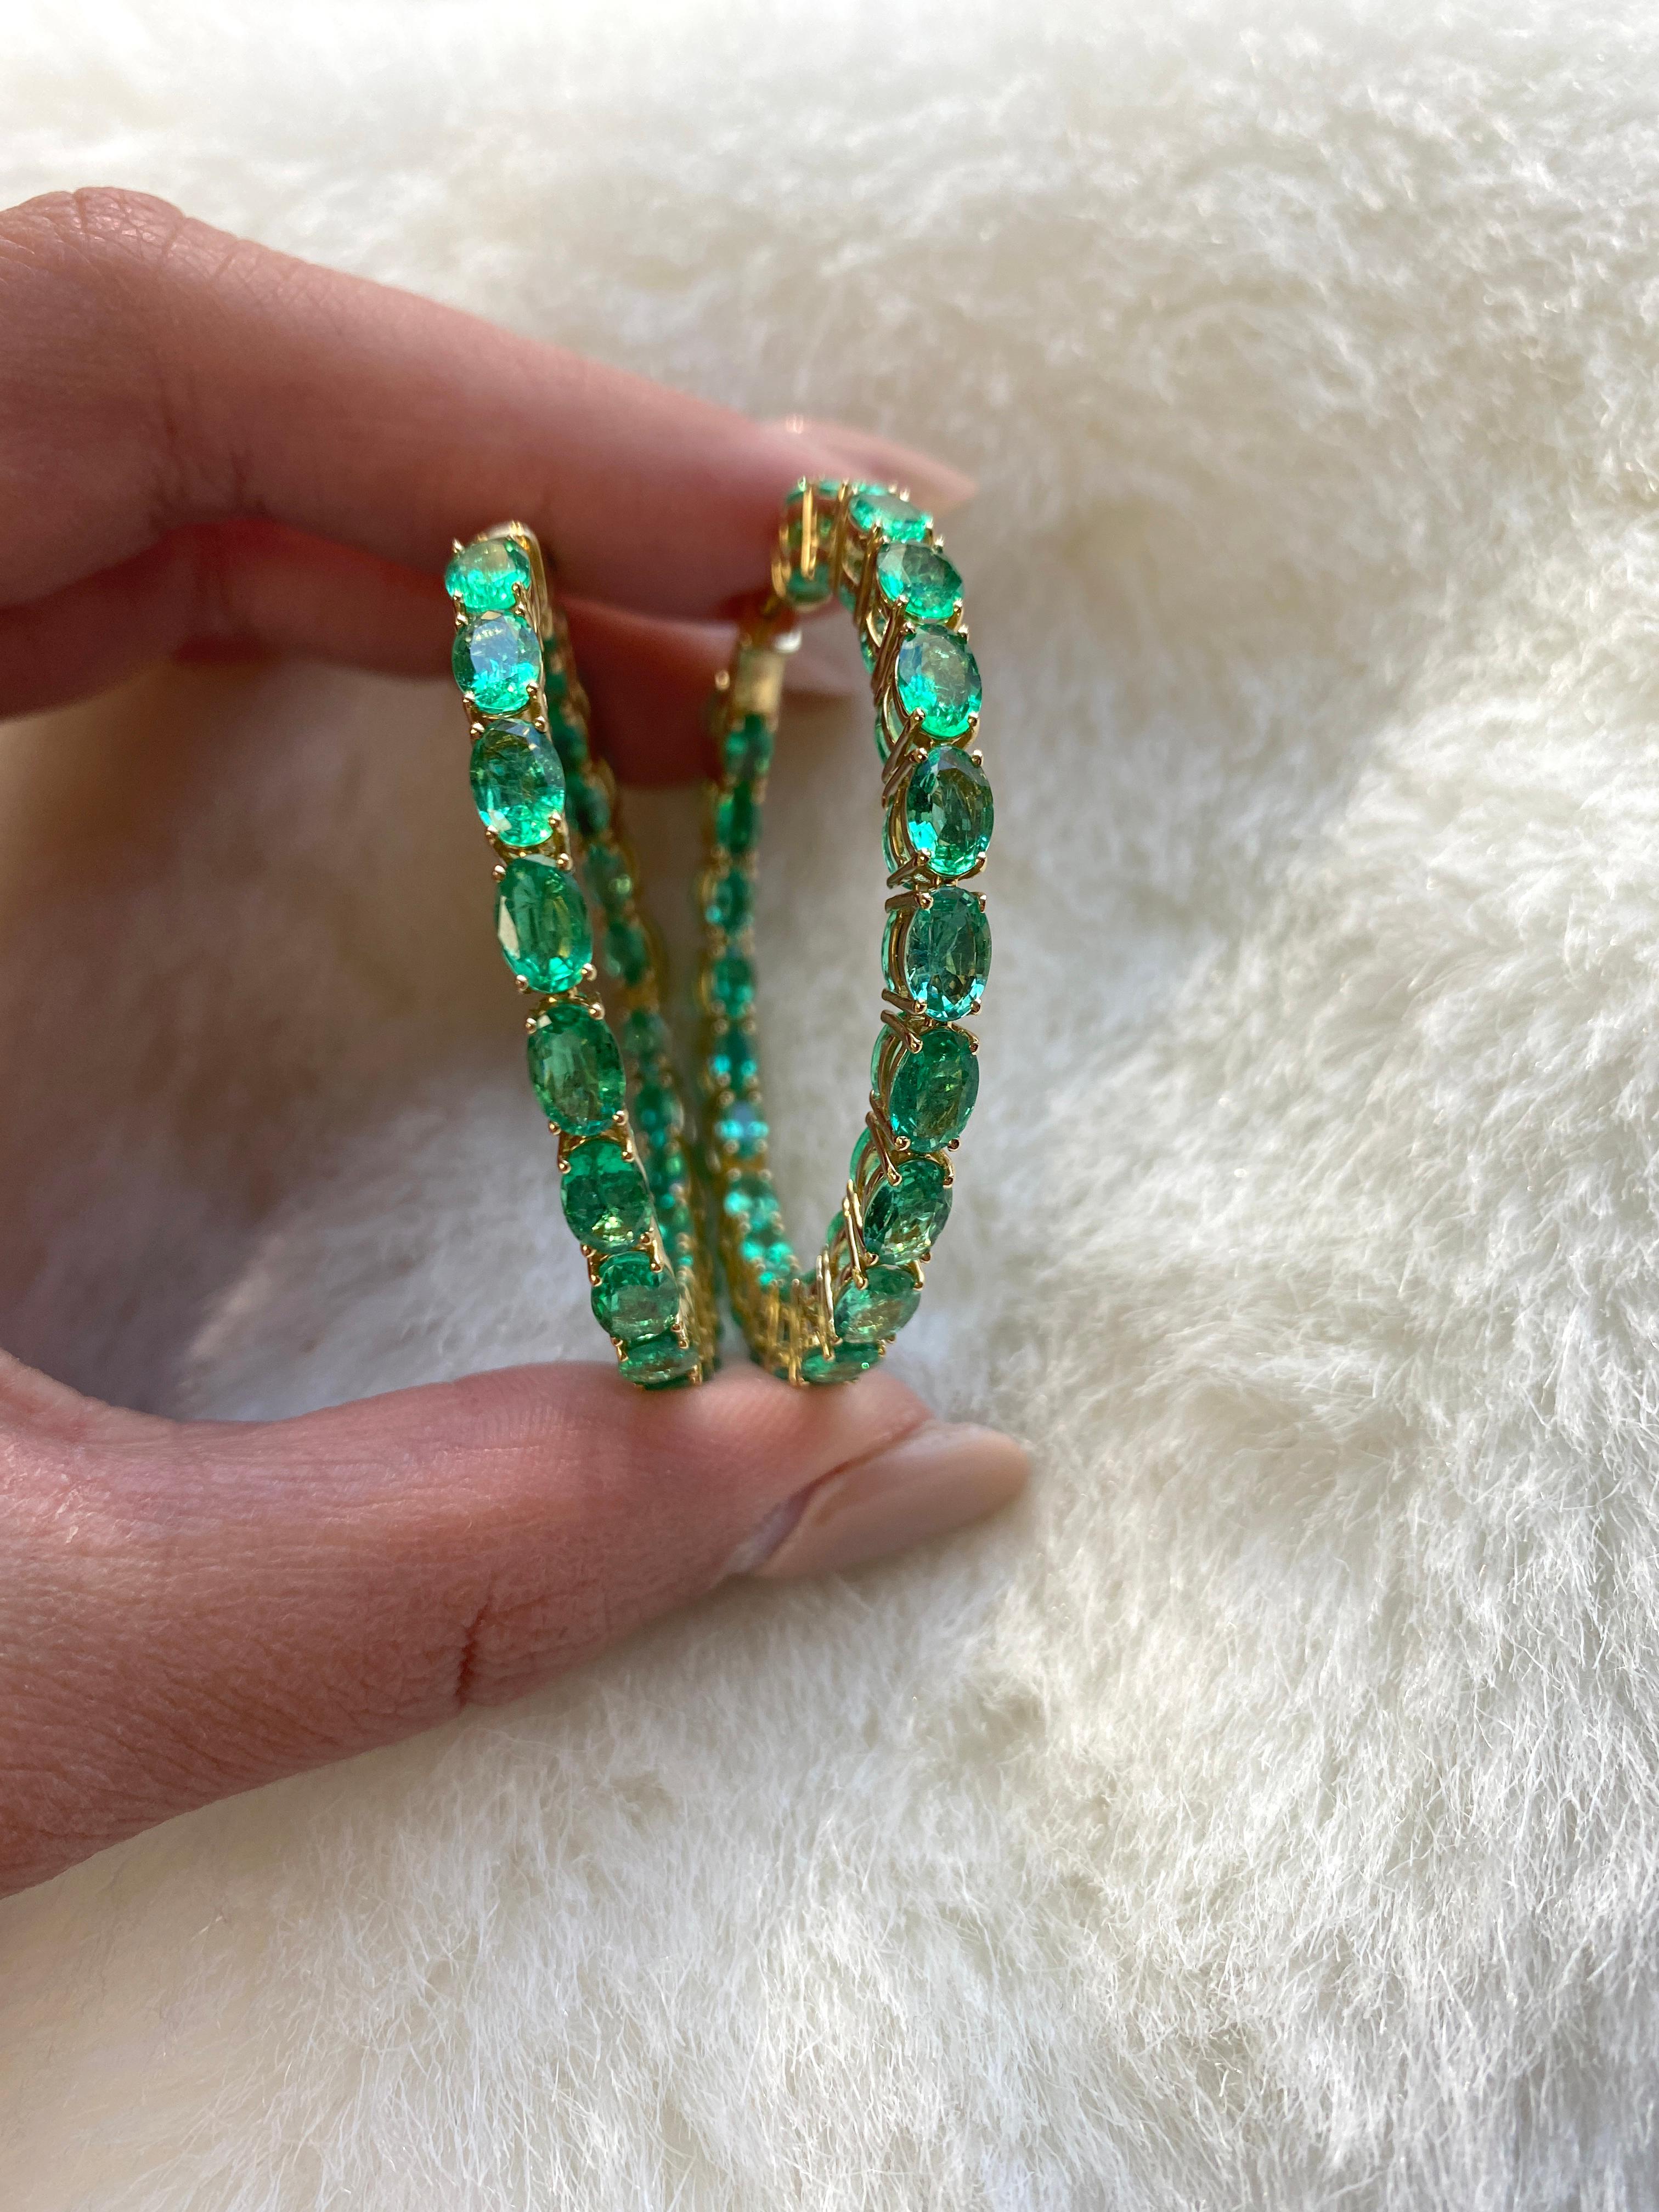 These stunning Faceted Oval Long Emerald Hoops from the exquisite 'G-One' Collection is an awe-inspiring piece crafted in 18K Yellow Gold. Its elegant design features a series of meticulously cut faceted oval emeralds adorning a sleek hoop, creating